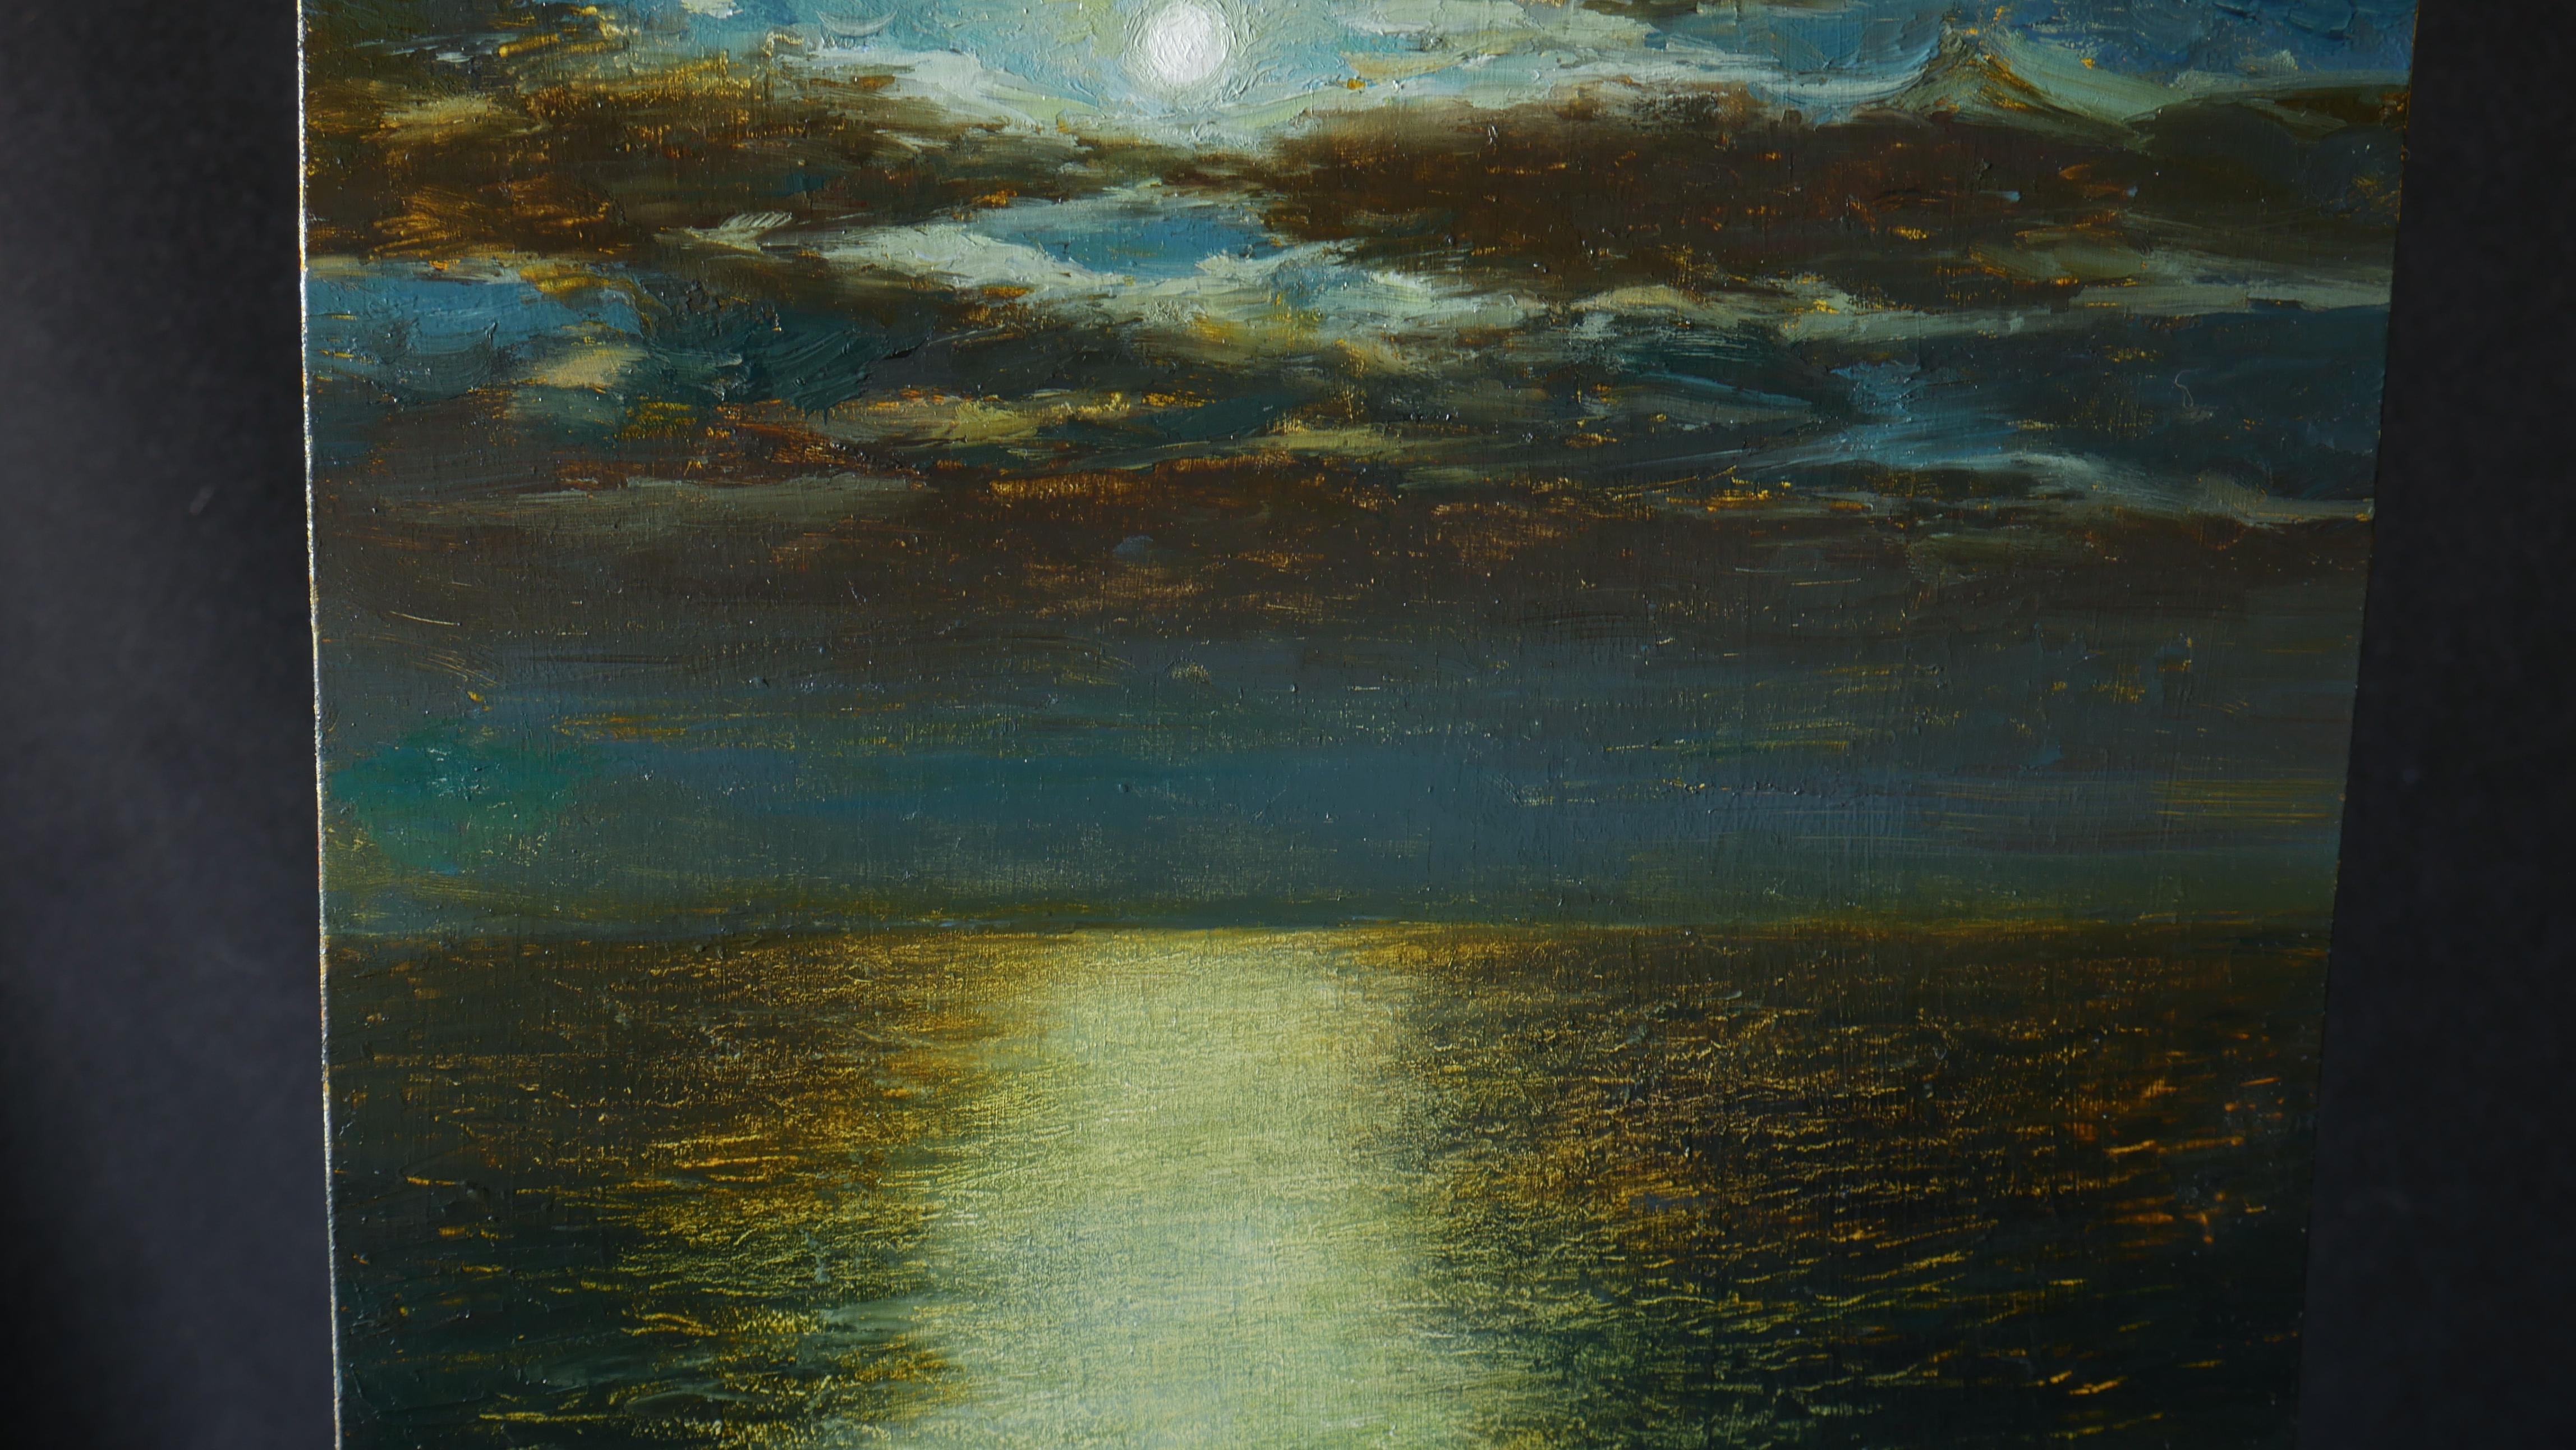 The night painting with the bright moon, the cloudy sky and a calm sea is a beautiful wall decor, the painting is full of different colours, combinations of warm and cold shades are professionally captured by the artist. Nikolay used his own